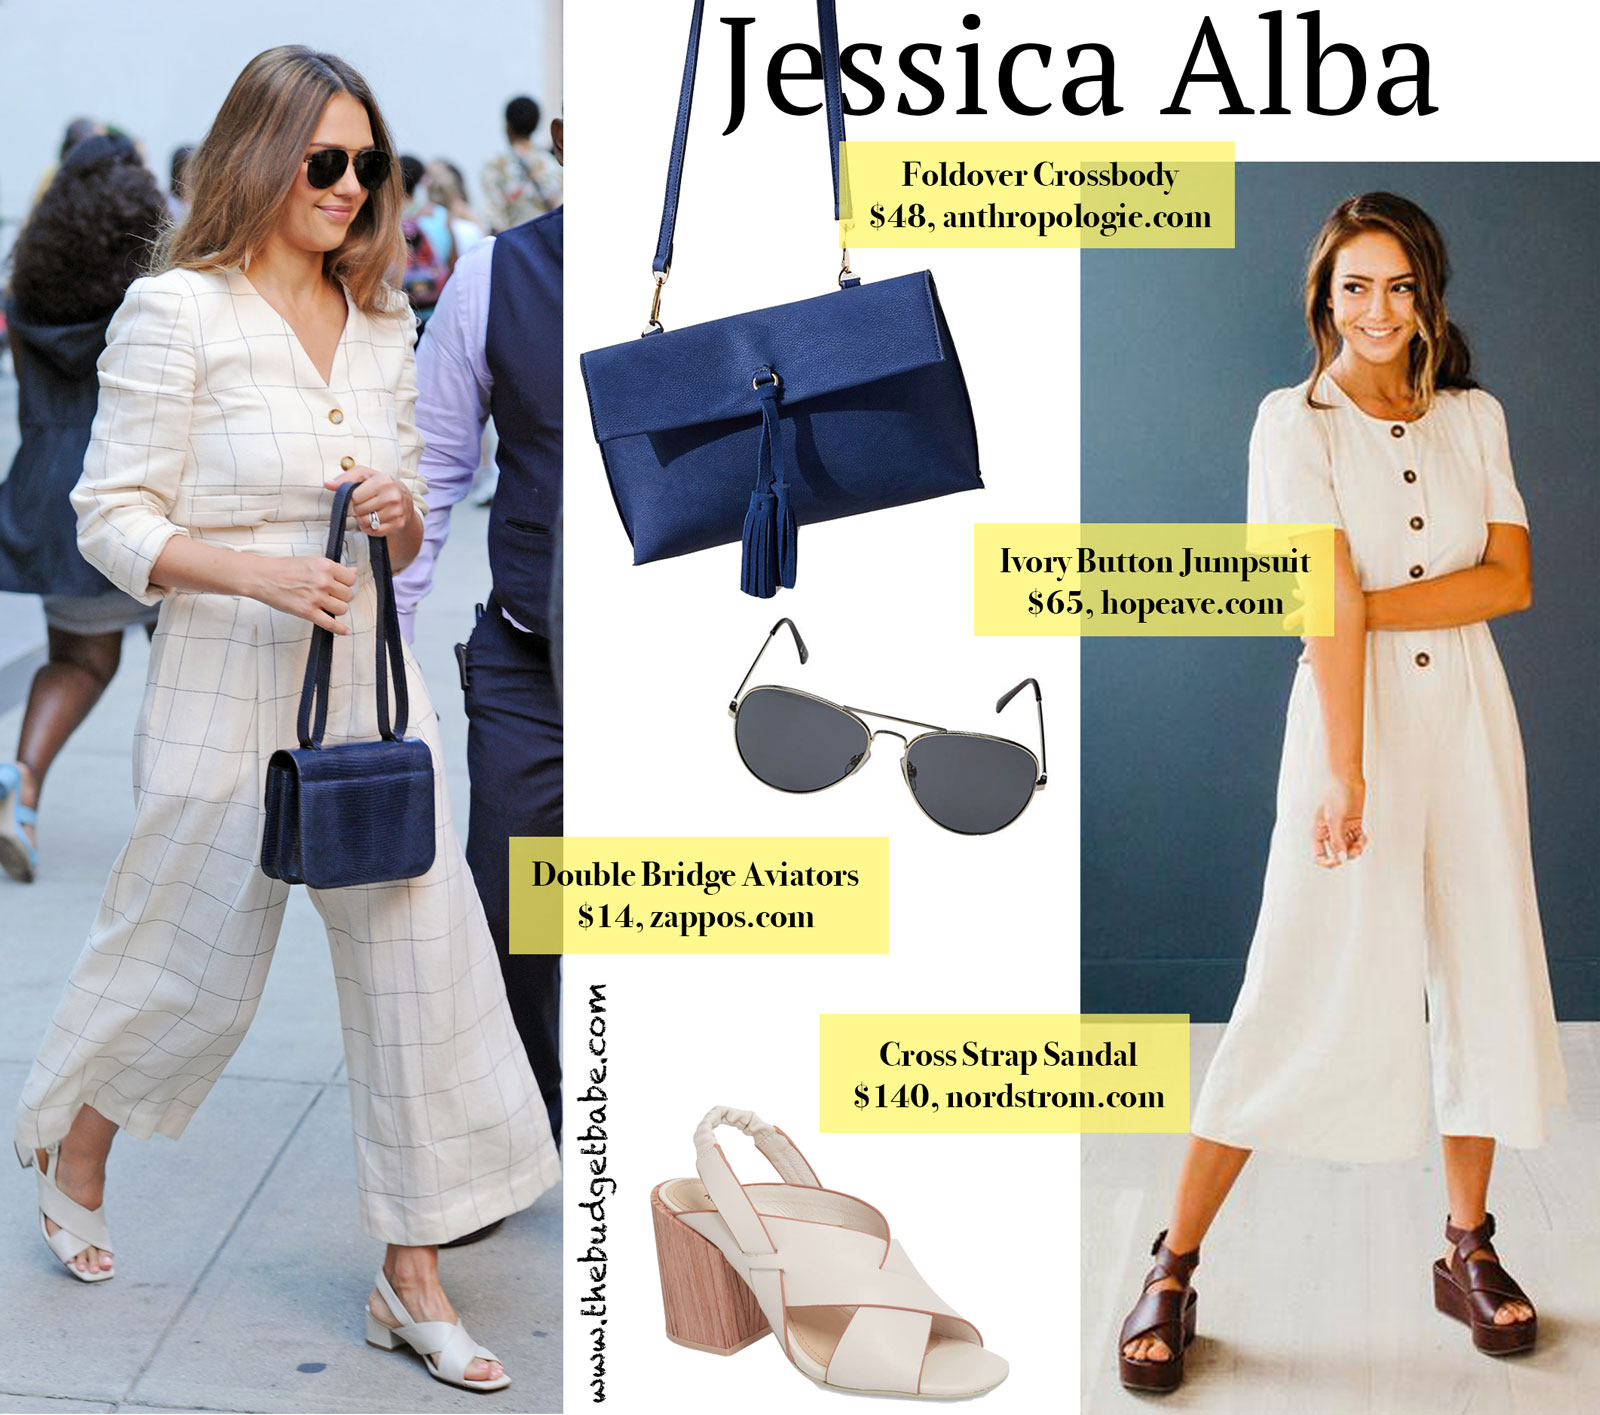 Jessica Alba Check Button Jumpsuit Look for Less